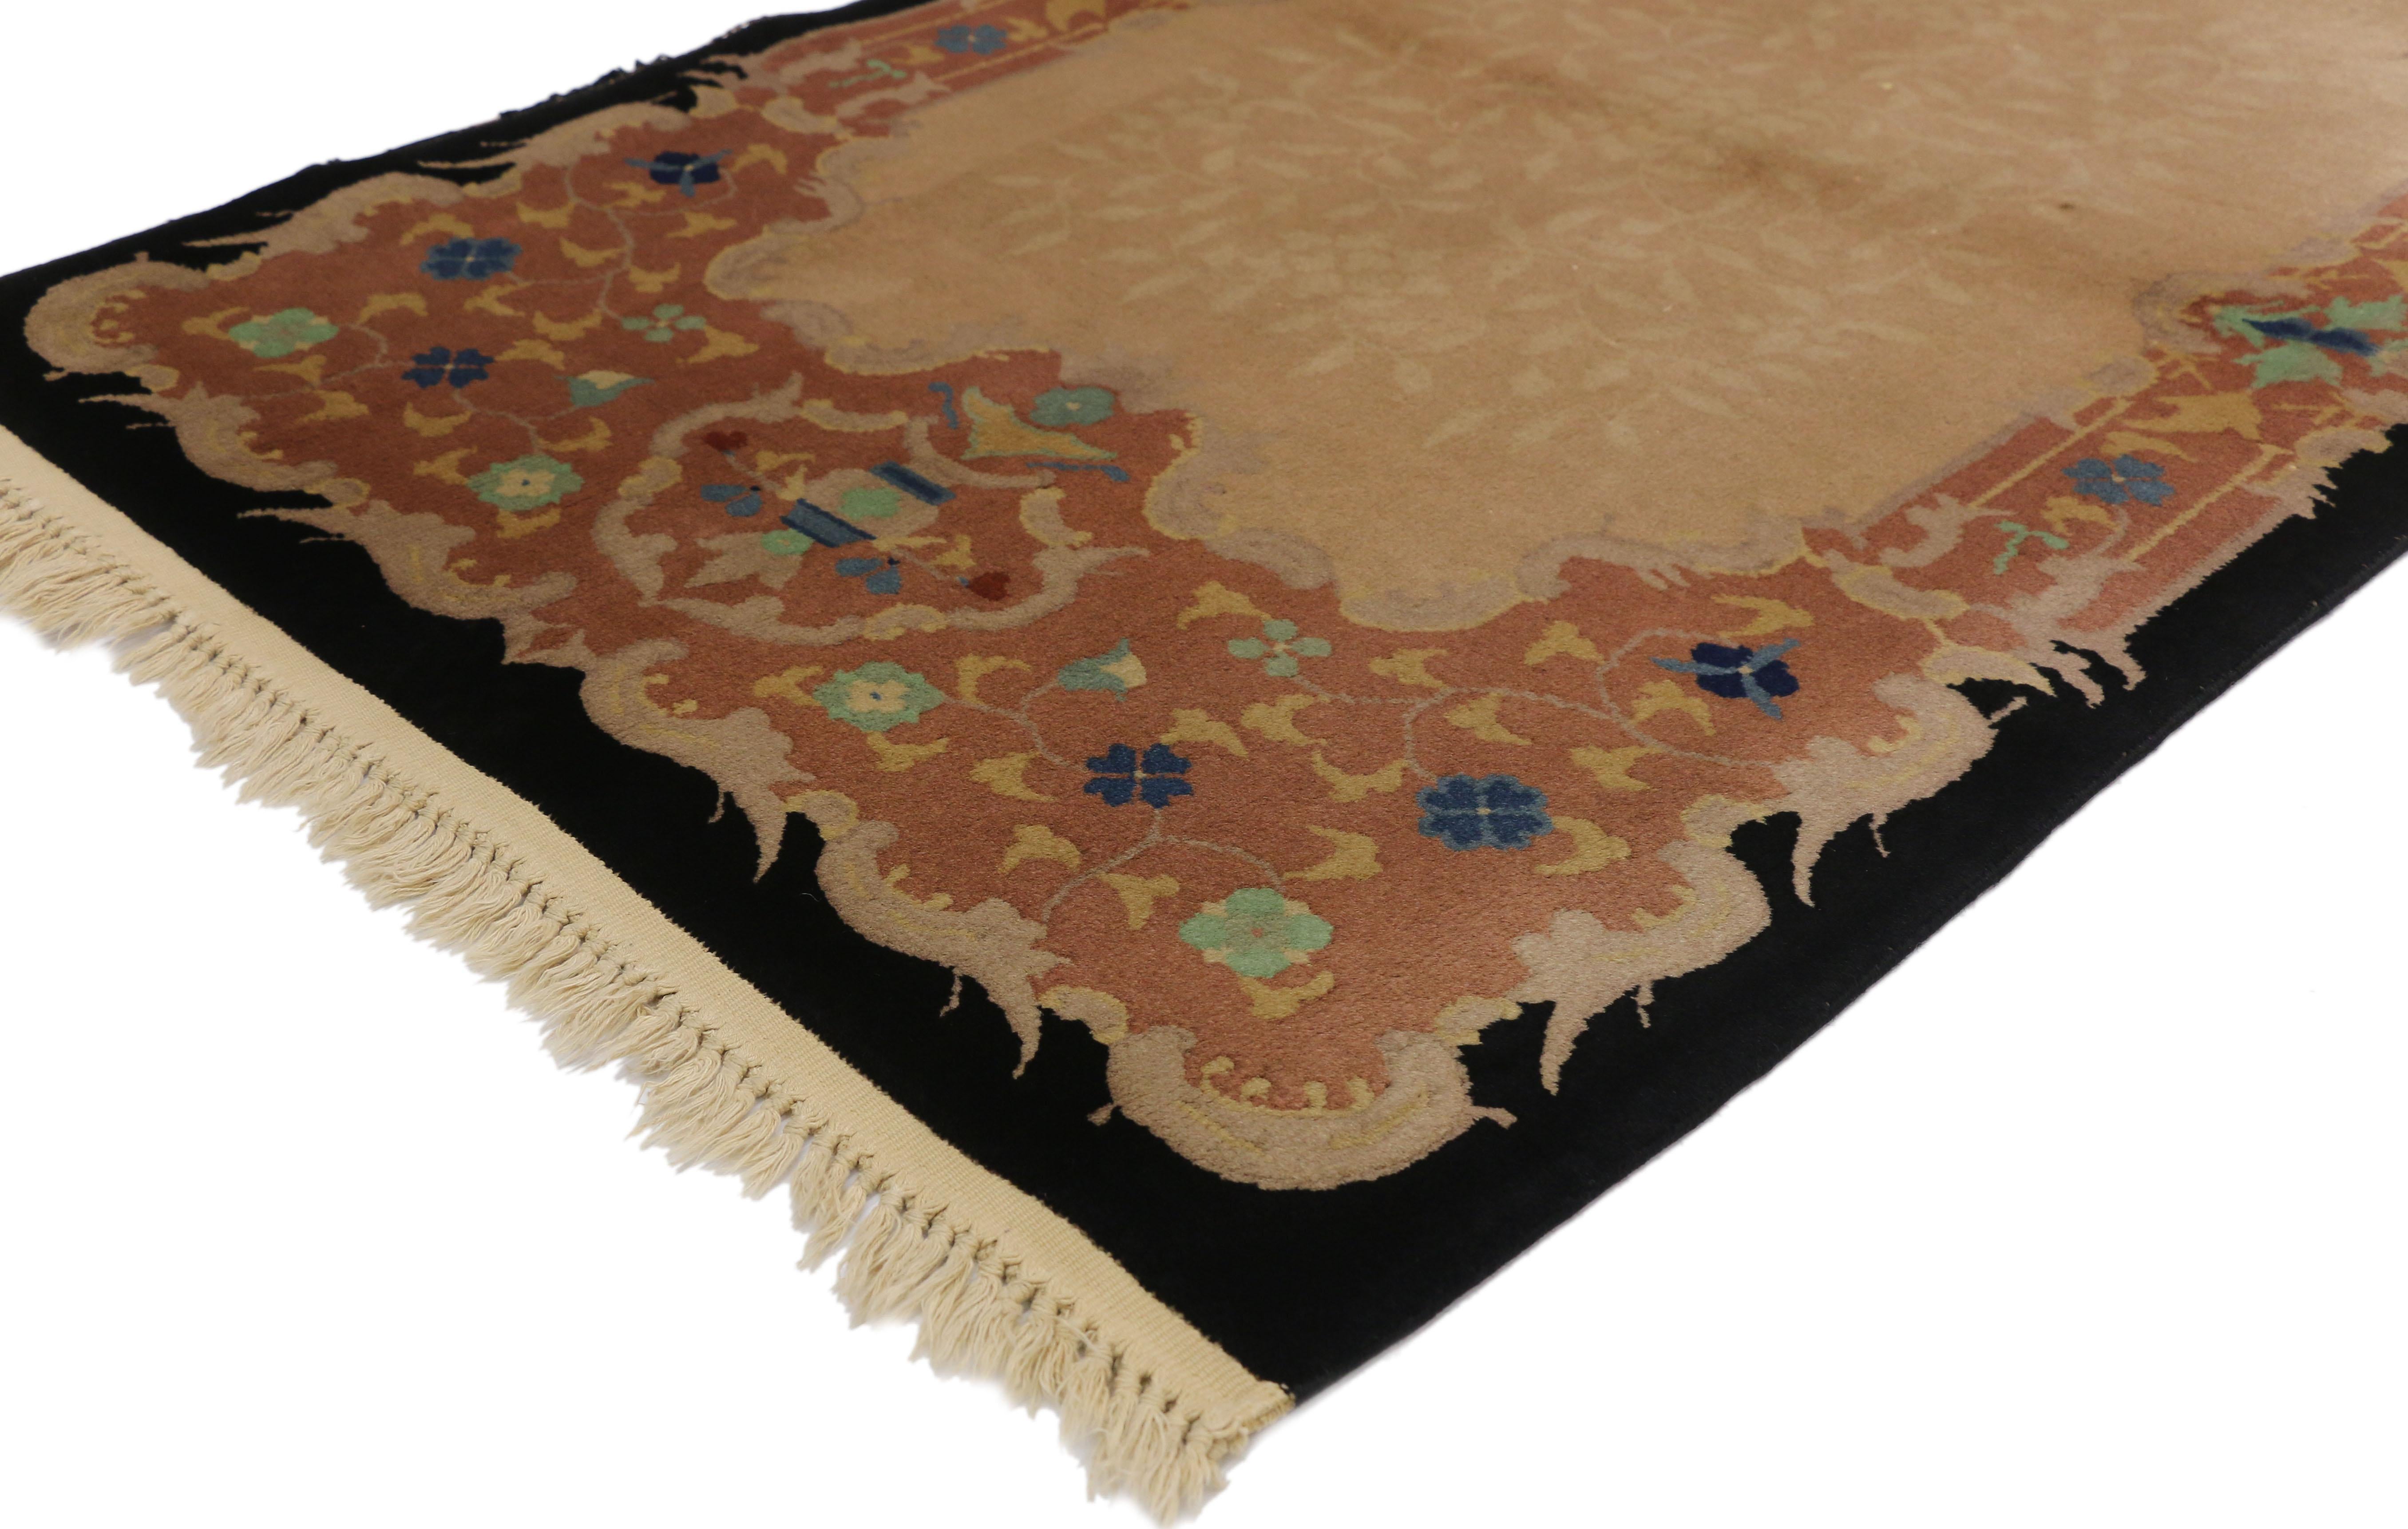 70718 antique Chinese Art Deco rug with European Influenced Chinoiserie style. This hand knotted wool antique Chinese Art Deco rug features a subtle all-over arabesque pattern spread across a champagne field enclosed by an ornate floral border. The